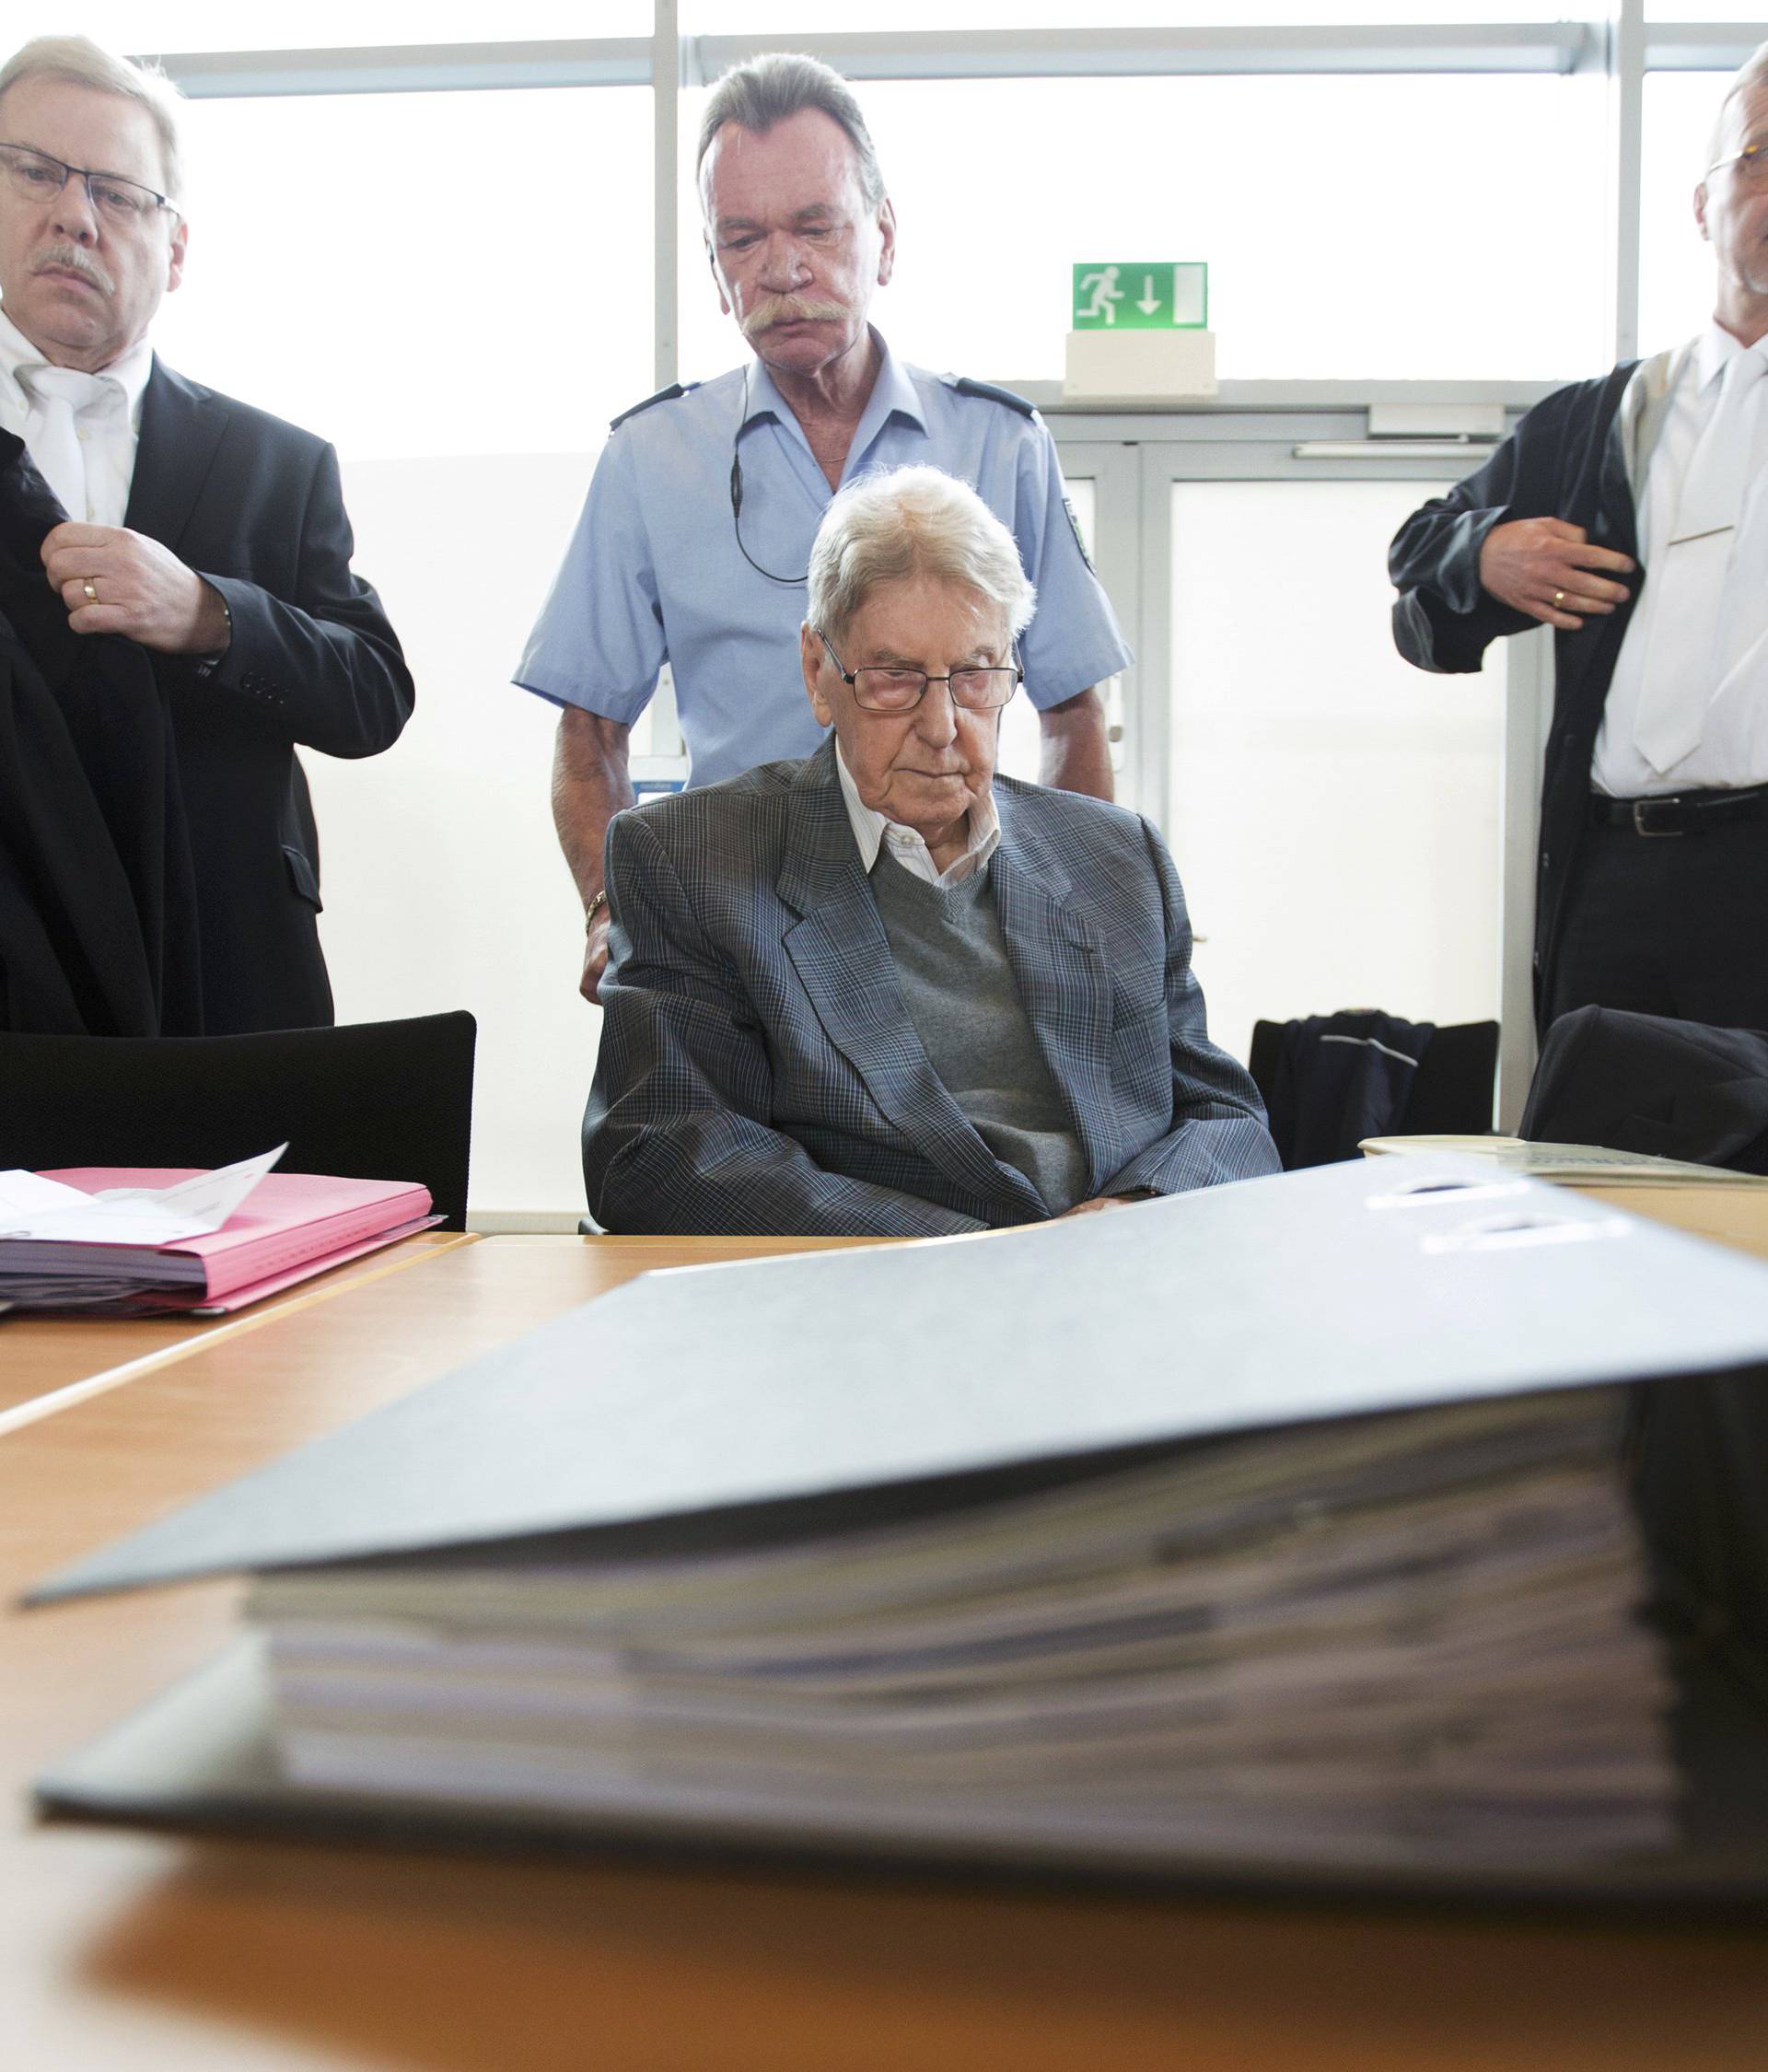 Defendant Hanning, a 94-year-old former guard at Auschwitz death camp, sits in a courtroom as his lawyers Scharmer and Salmen stand next to him before his trial in Detmold